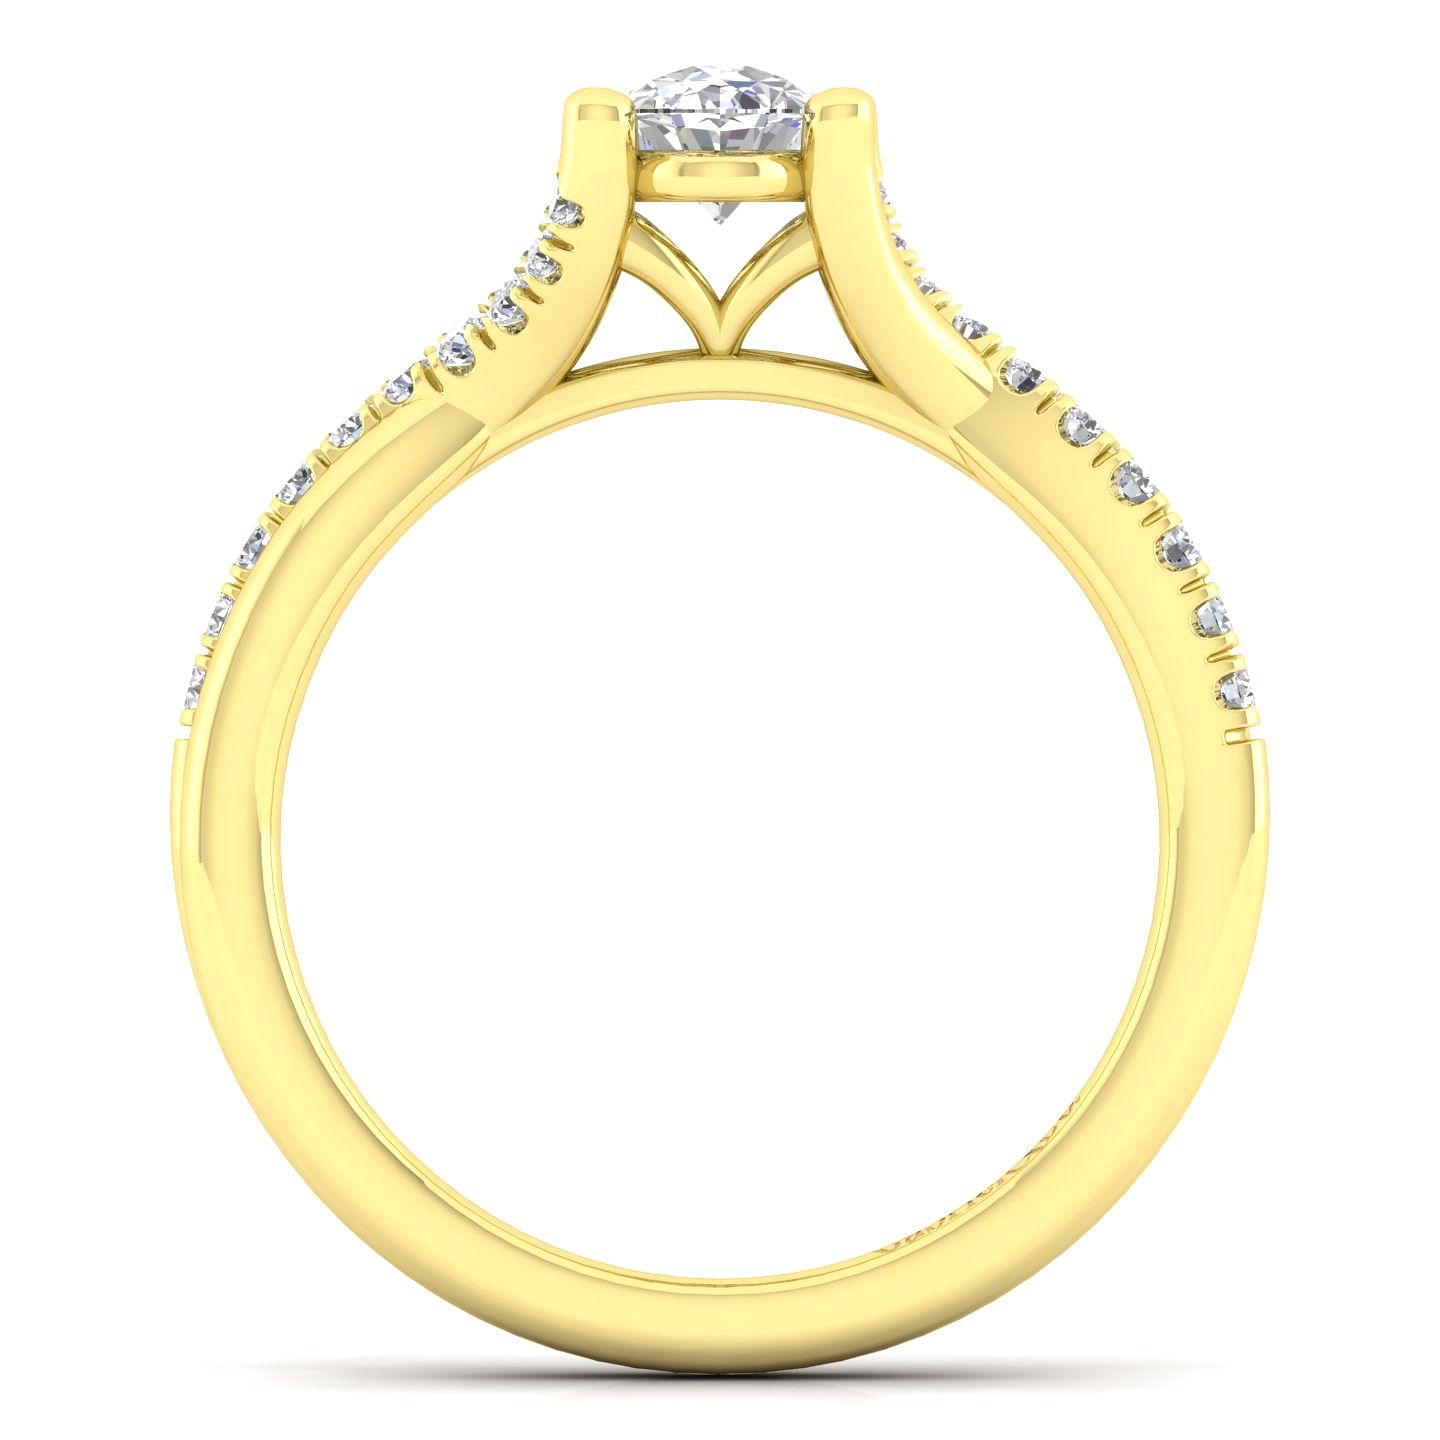 Leigh - 14K Yellow Gold Oval Diamond Engagement Ring - 0.15 ct - Shot 2